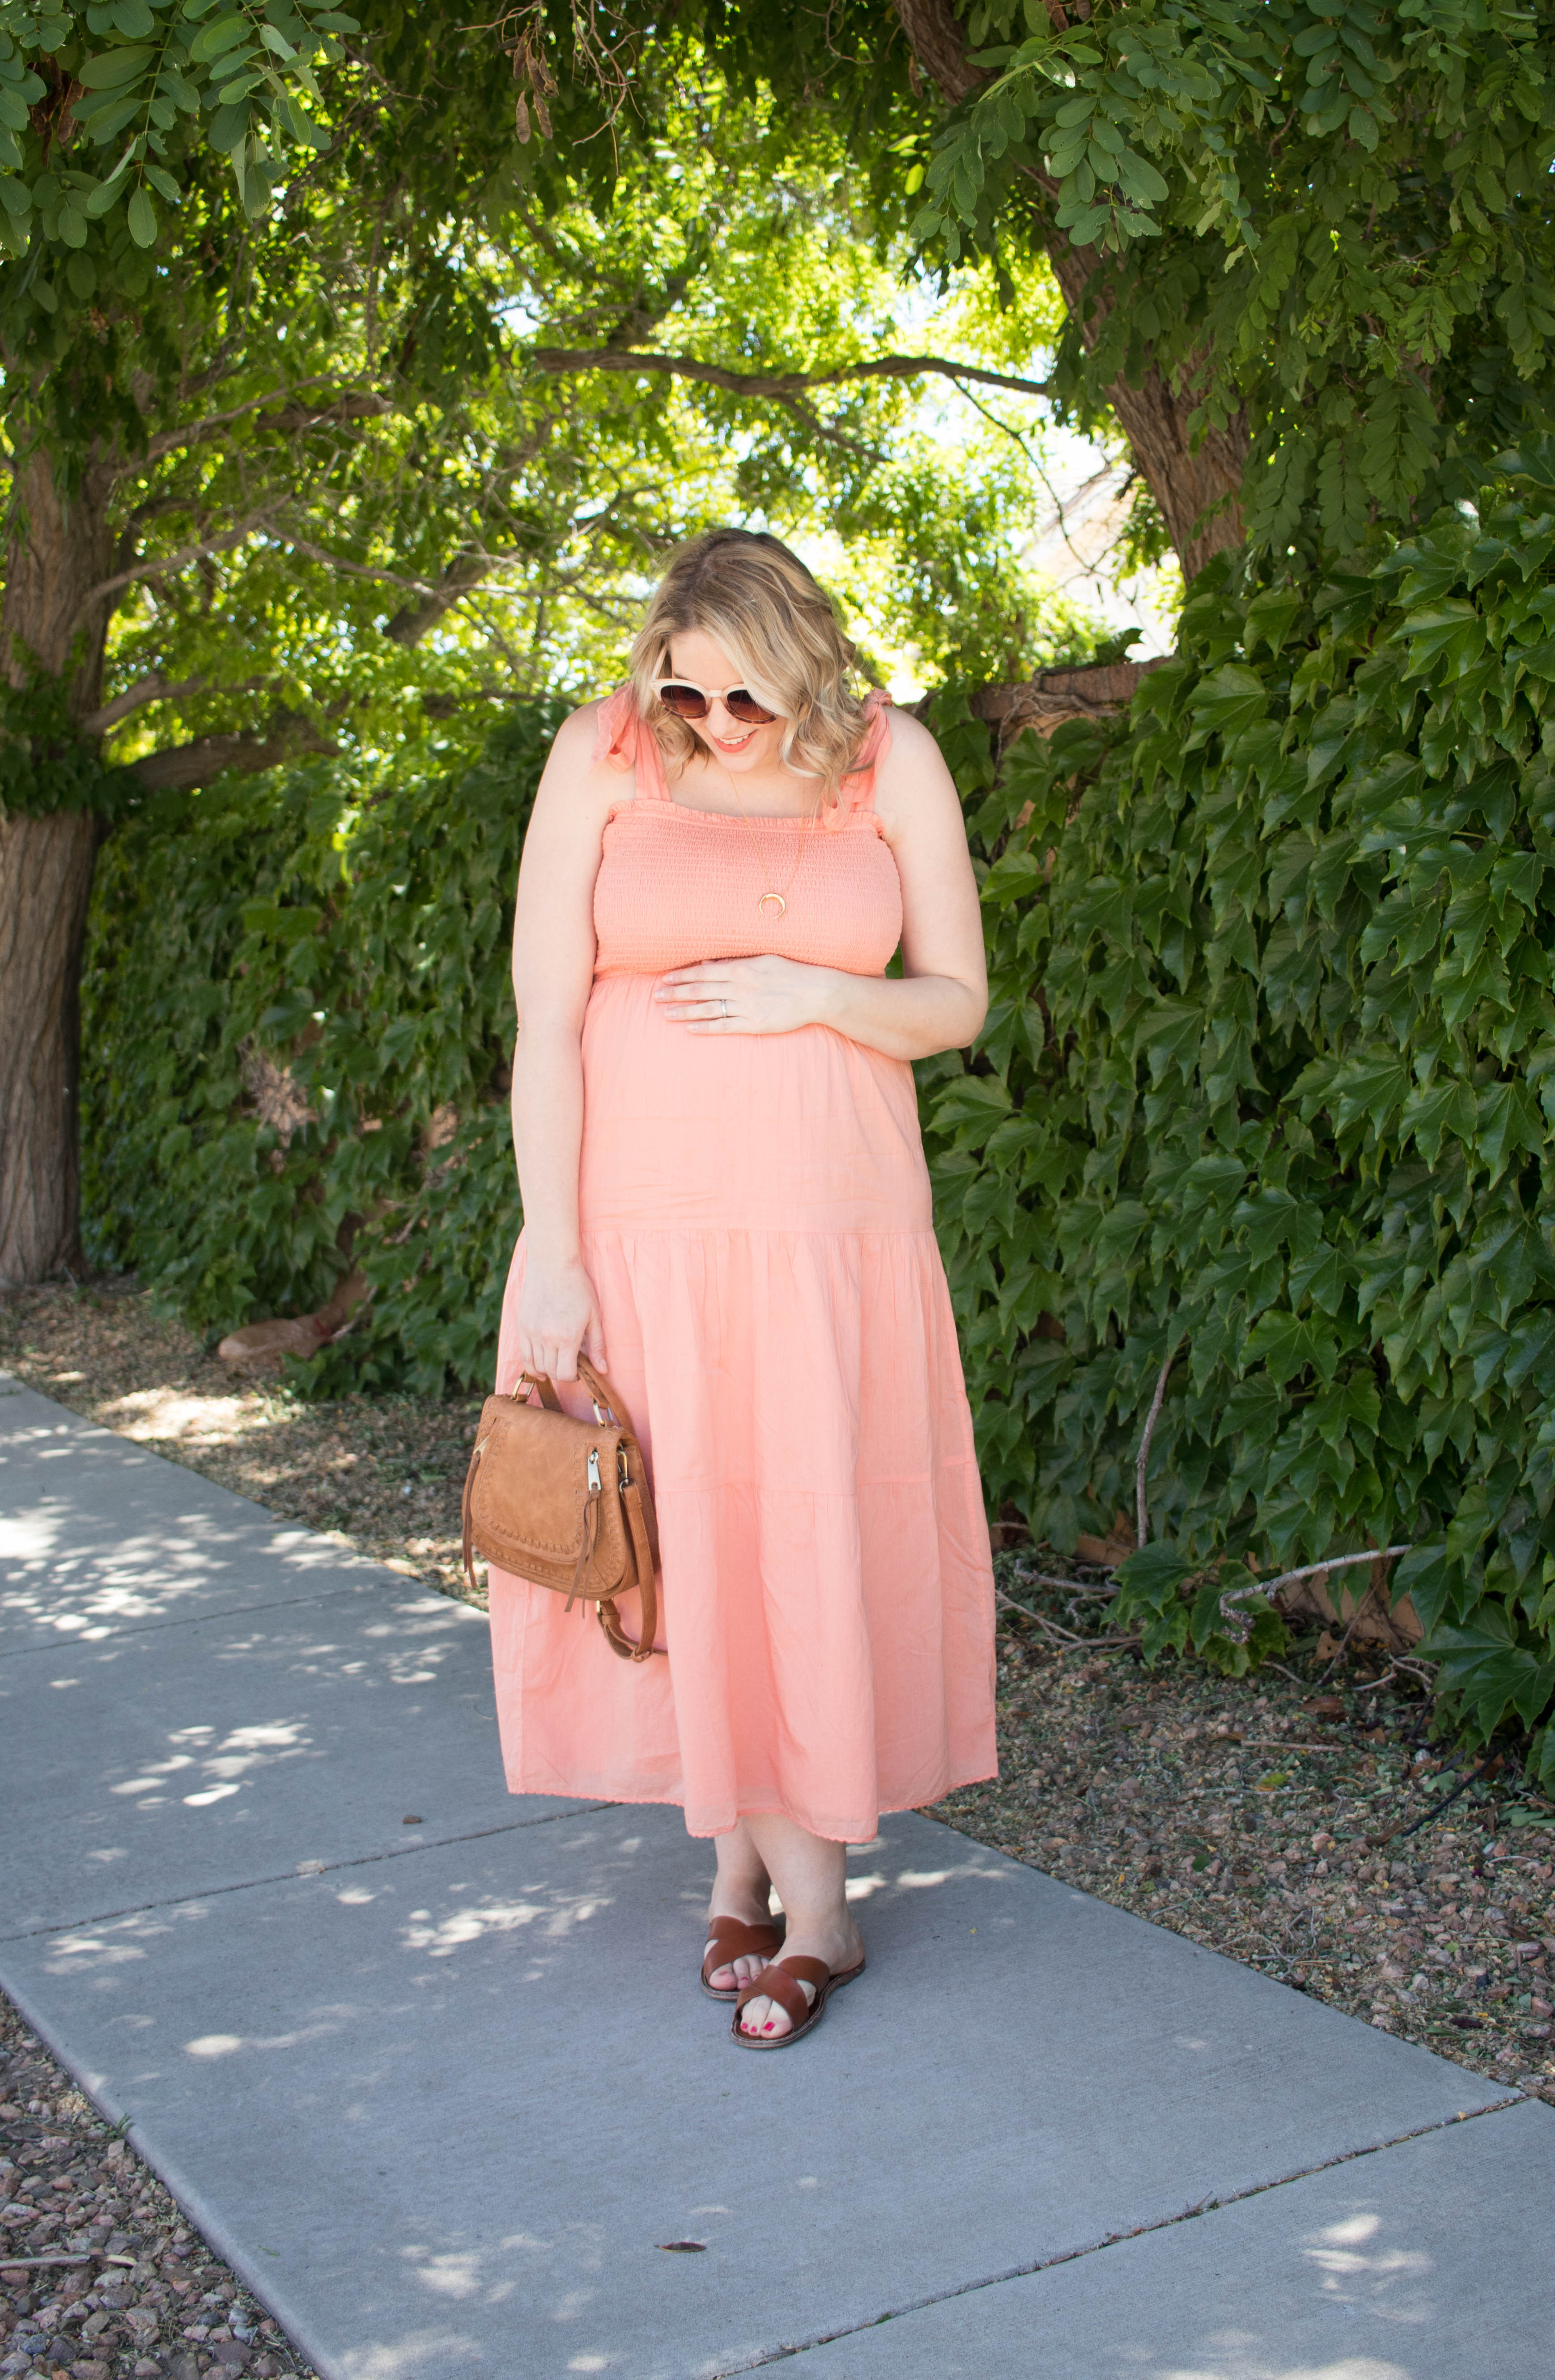 summer maternity style how to dress the bump #bumpstyle #maternitystyle #summeroutfit